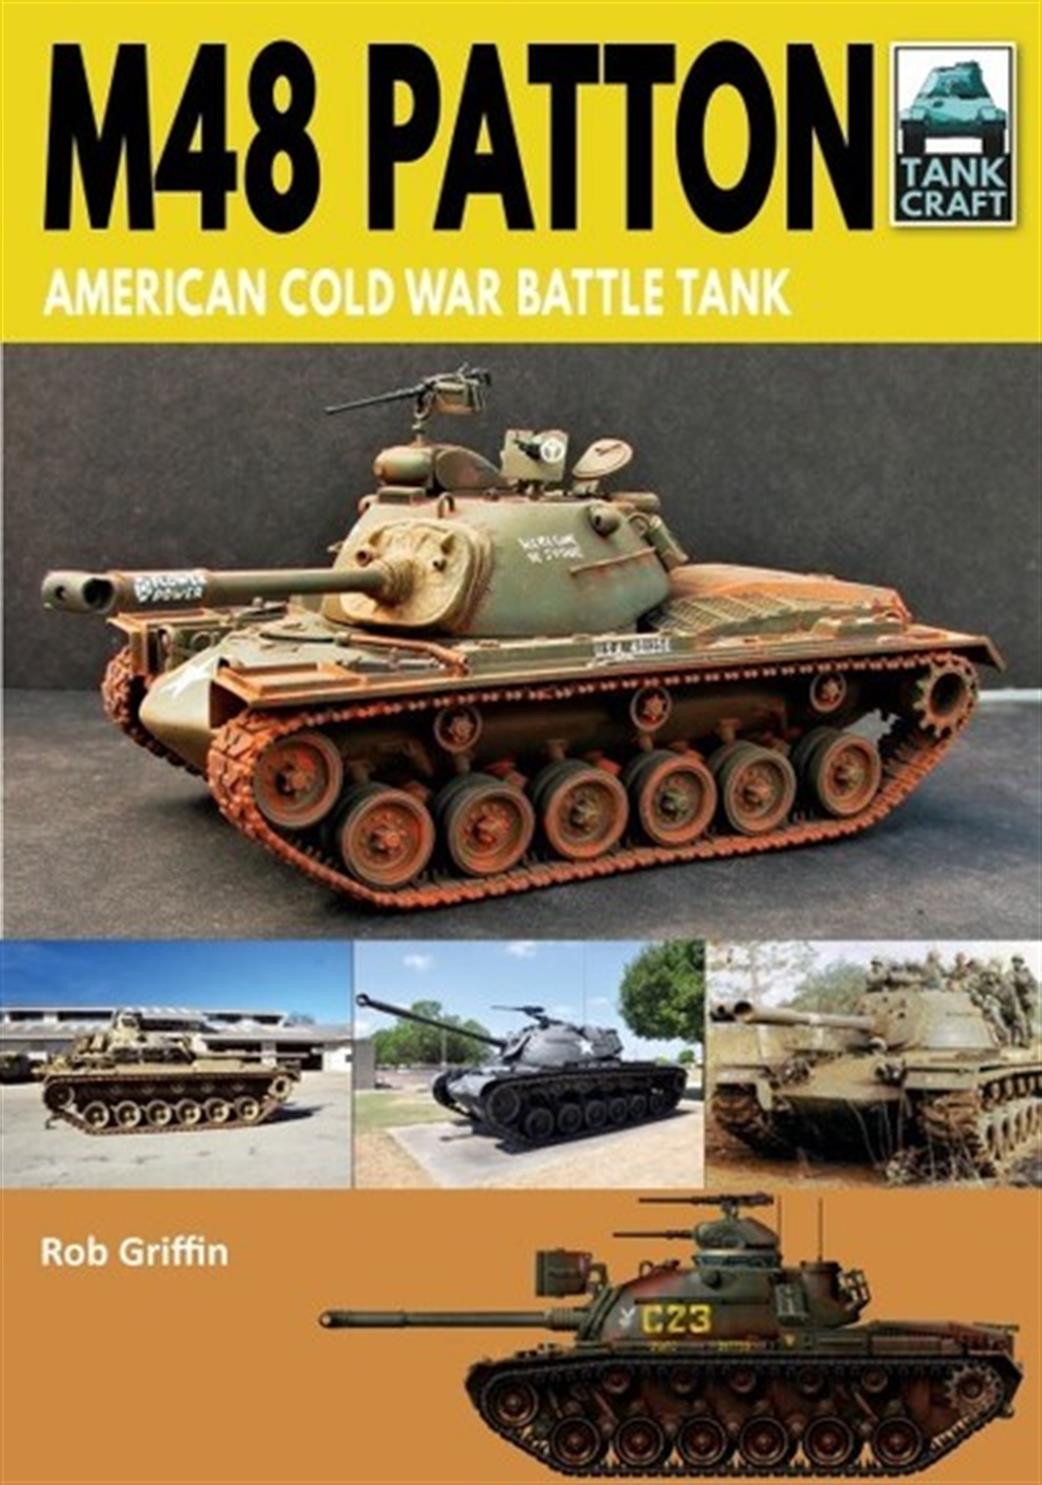 Pen & Sword  9781526757739 TankCraft 22 M48 Patton Tank Craft Book American Cold War Battle Tank By Rob Griffin